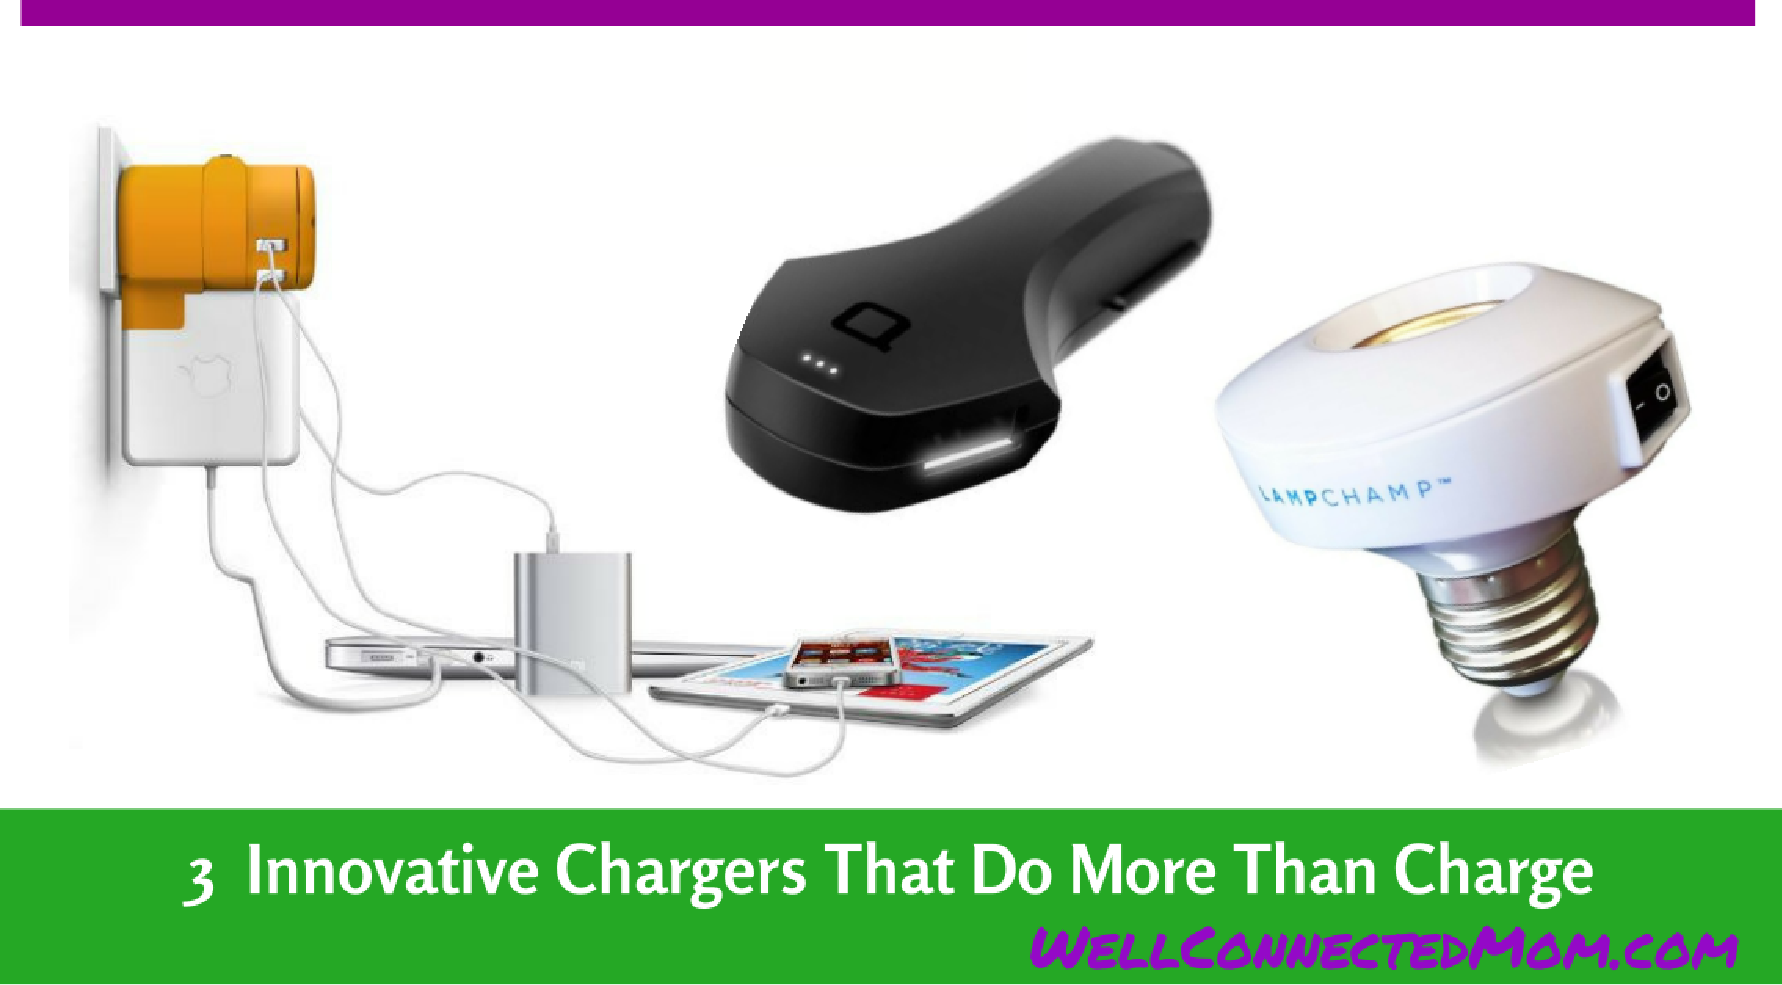 3 Unique USB Chargers to Power Your Devices - The Well Connected Mom